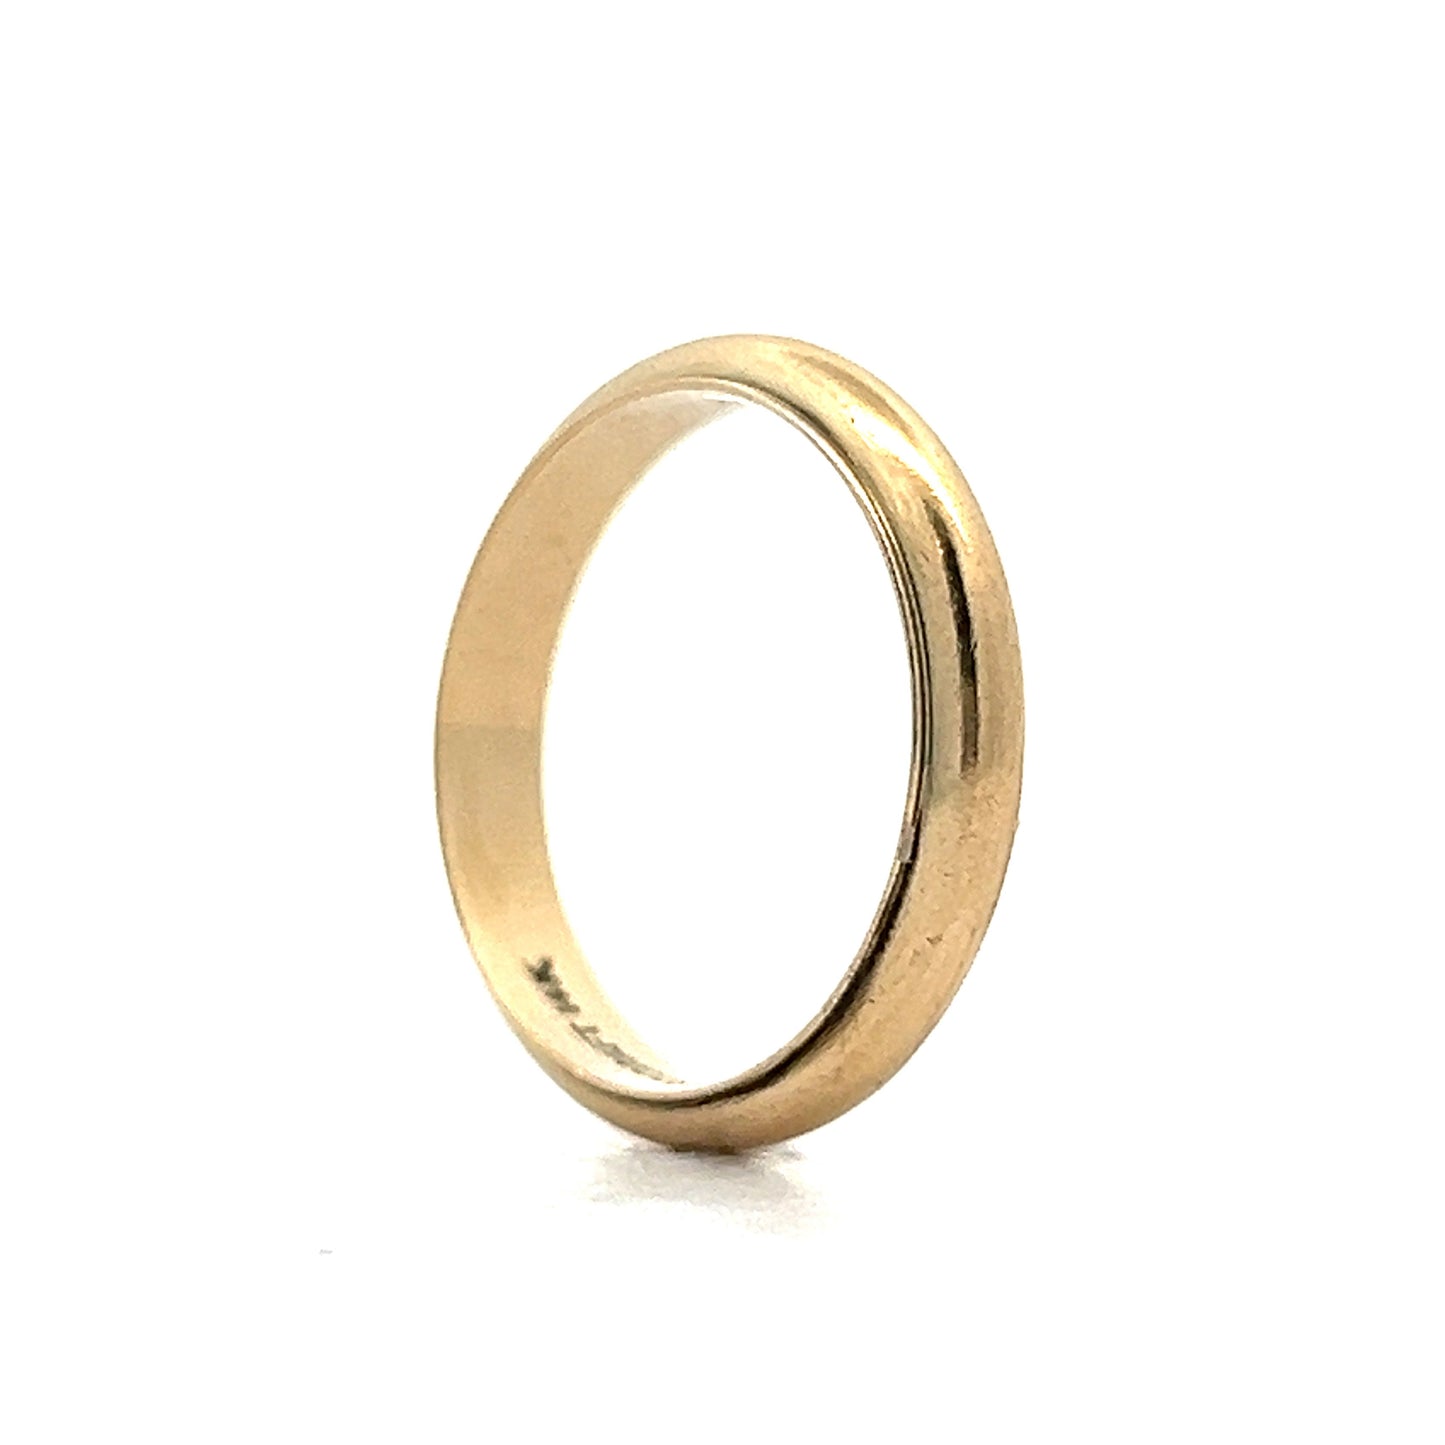 Vintage 4mm Men's Wedding Band in Yellow Gold